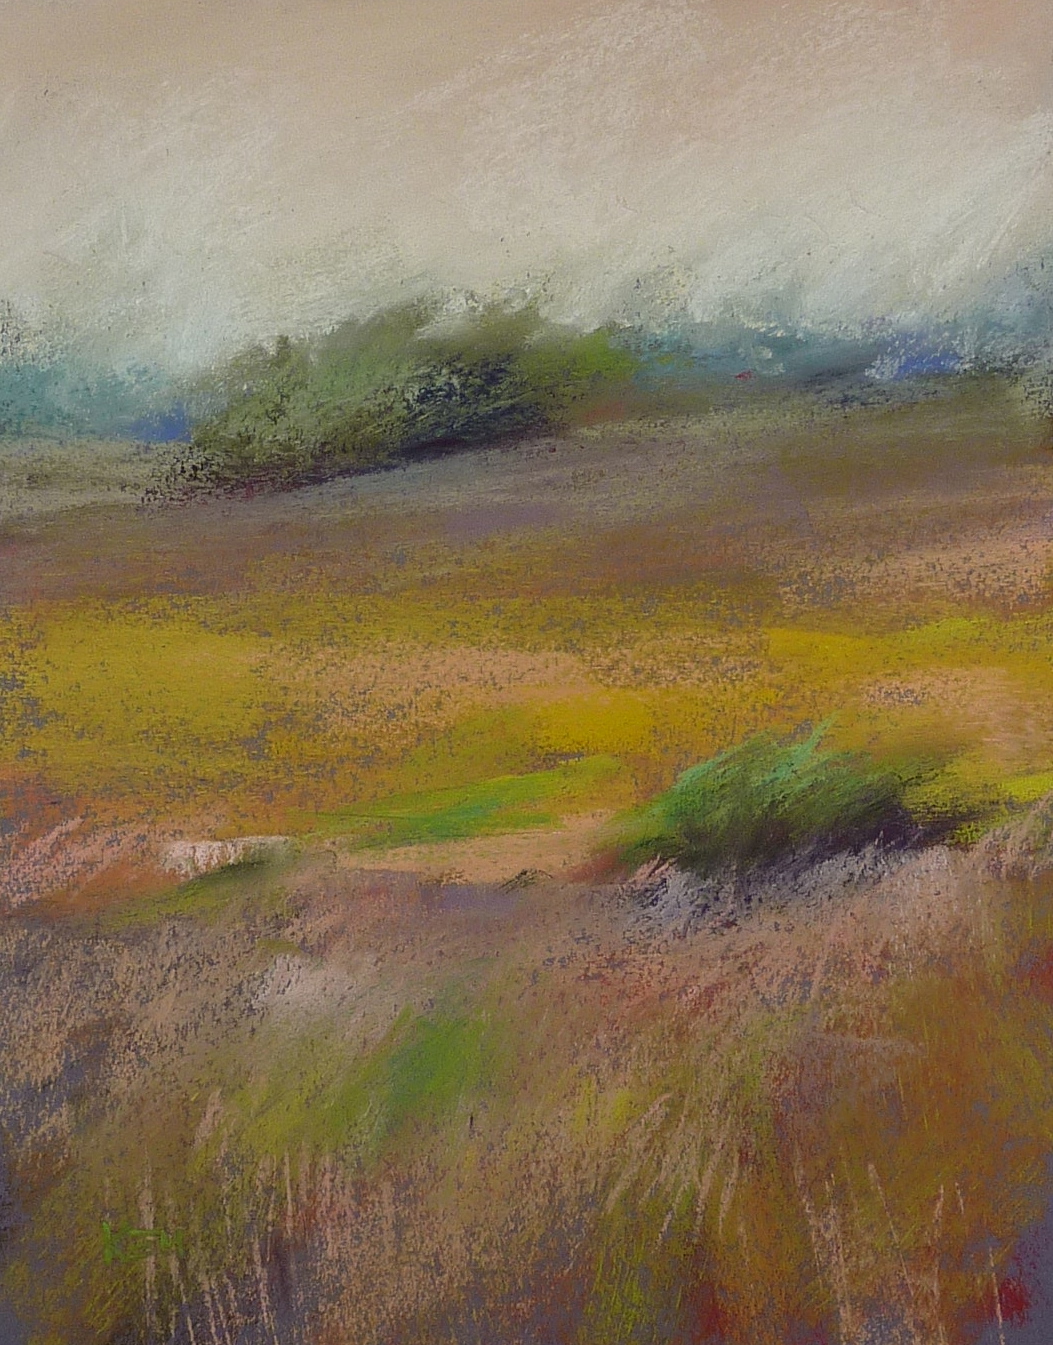 Painting My World: Pastel FAQ: Choosing Paper Color for a Painting